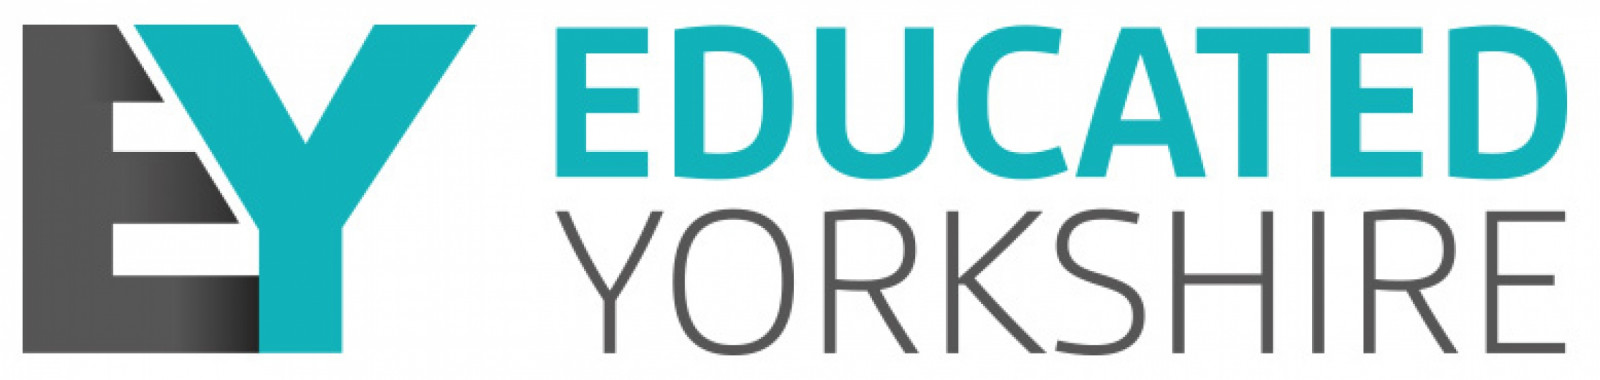 EY Educated Yorkshire